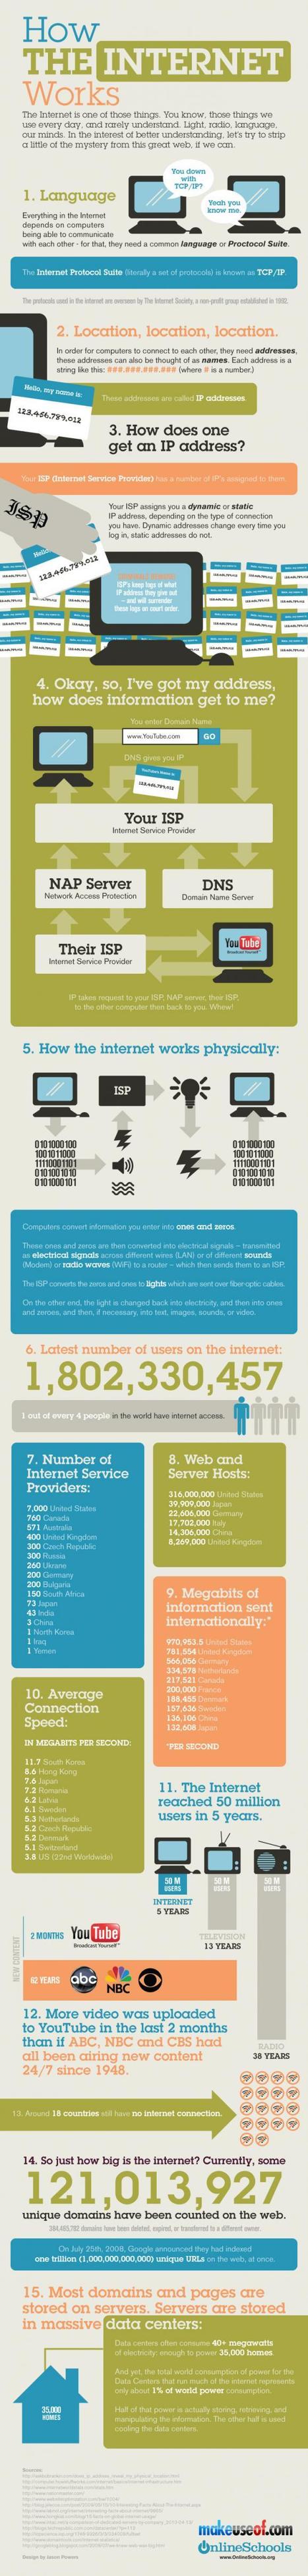 How the internet works [Infographic] | Latest Social Media News | Scoop.it